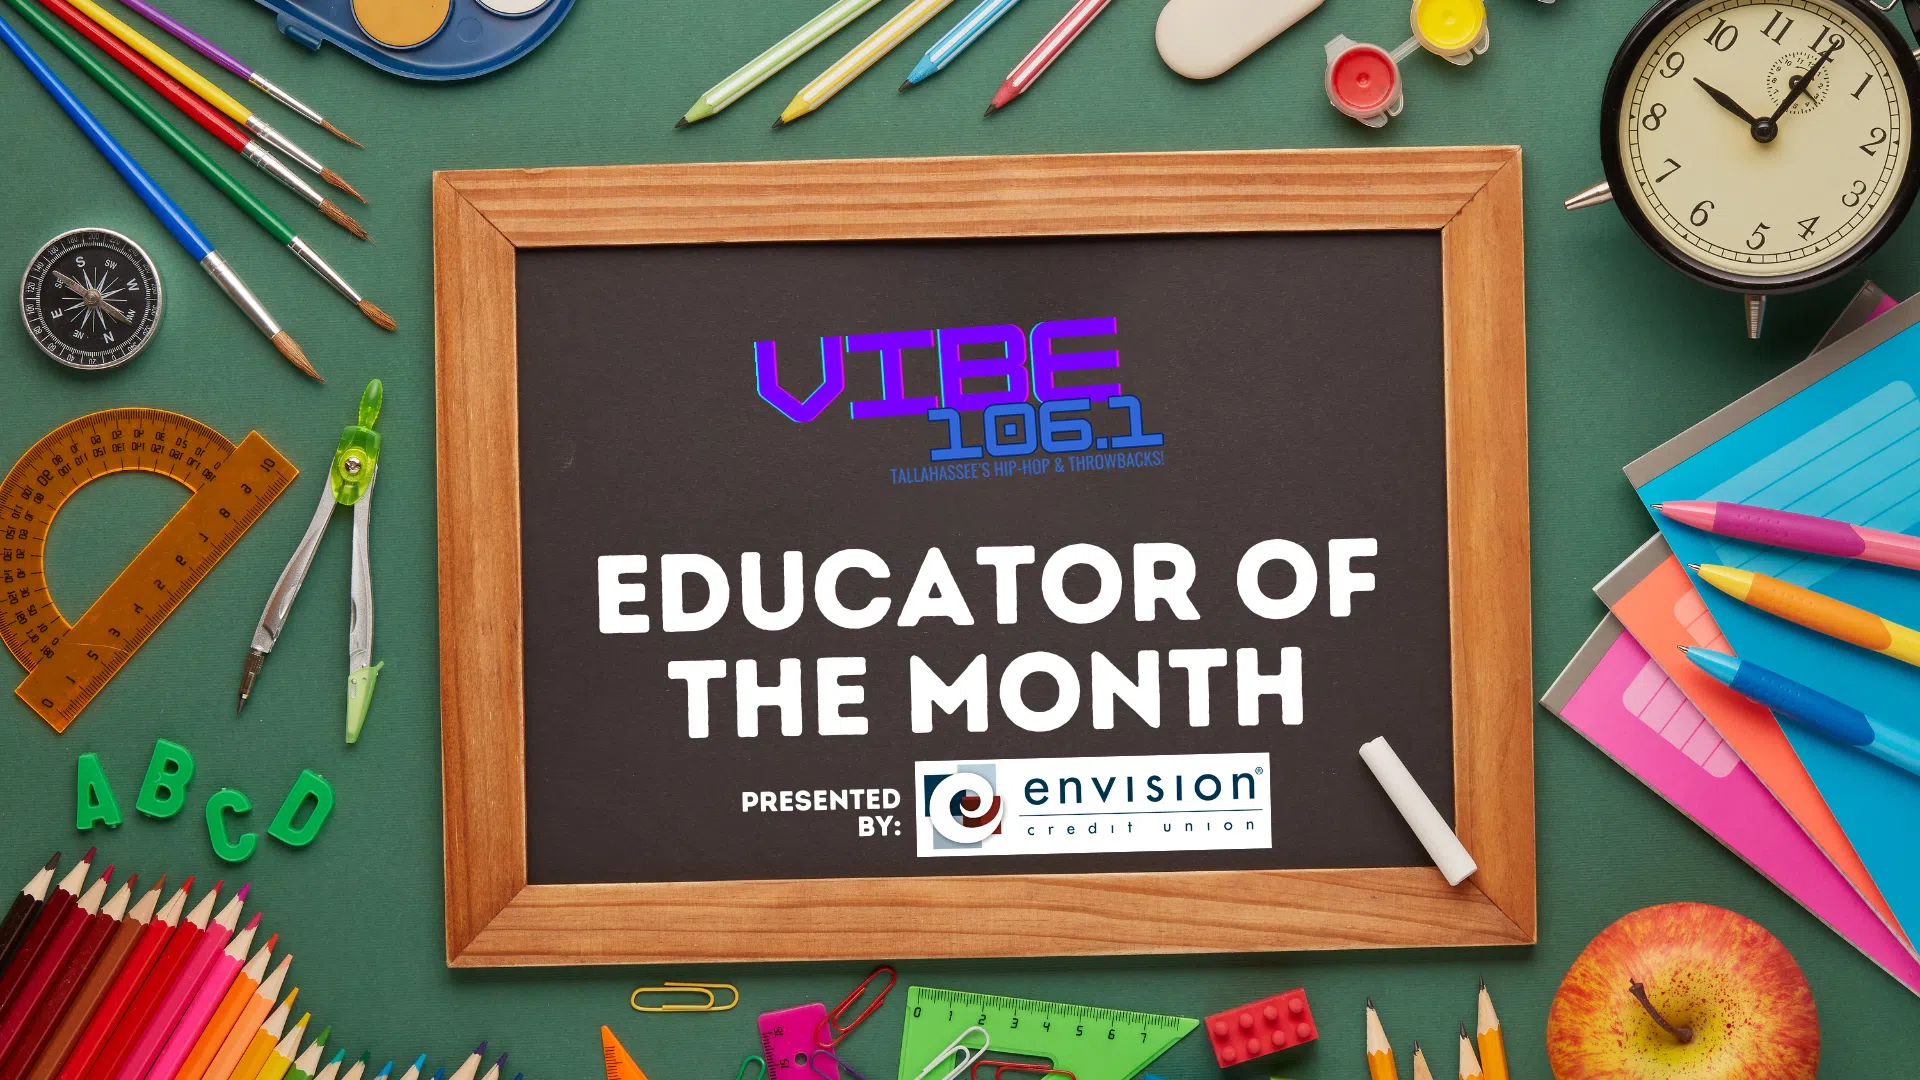 Feature: https://www.vibe1061.com/2023/10/10/educator-of-the-month/